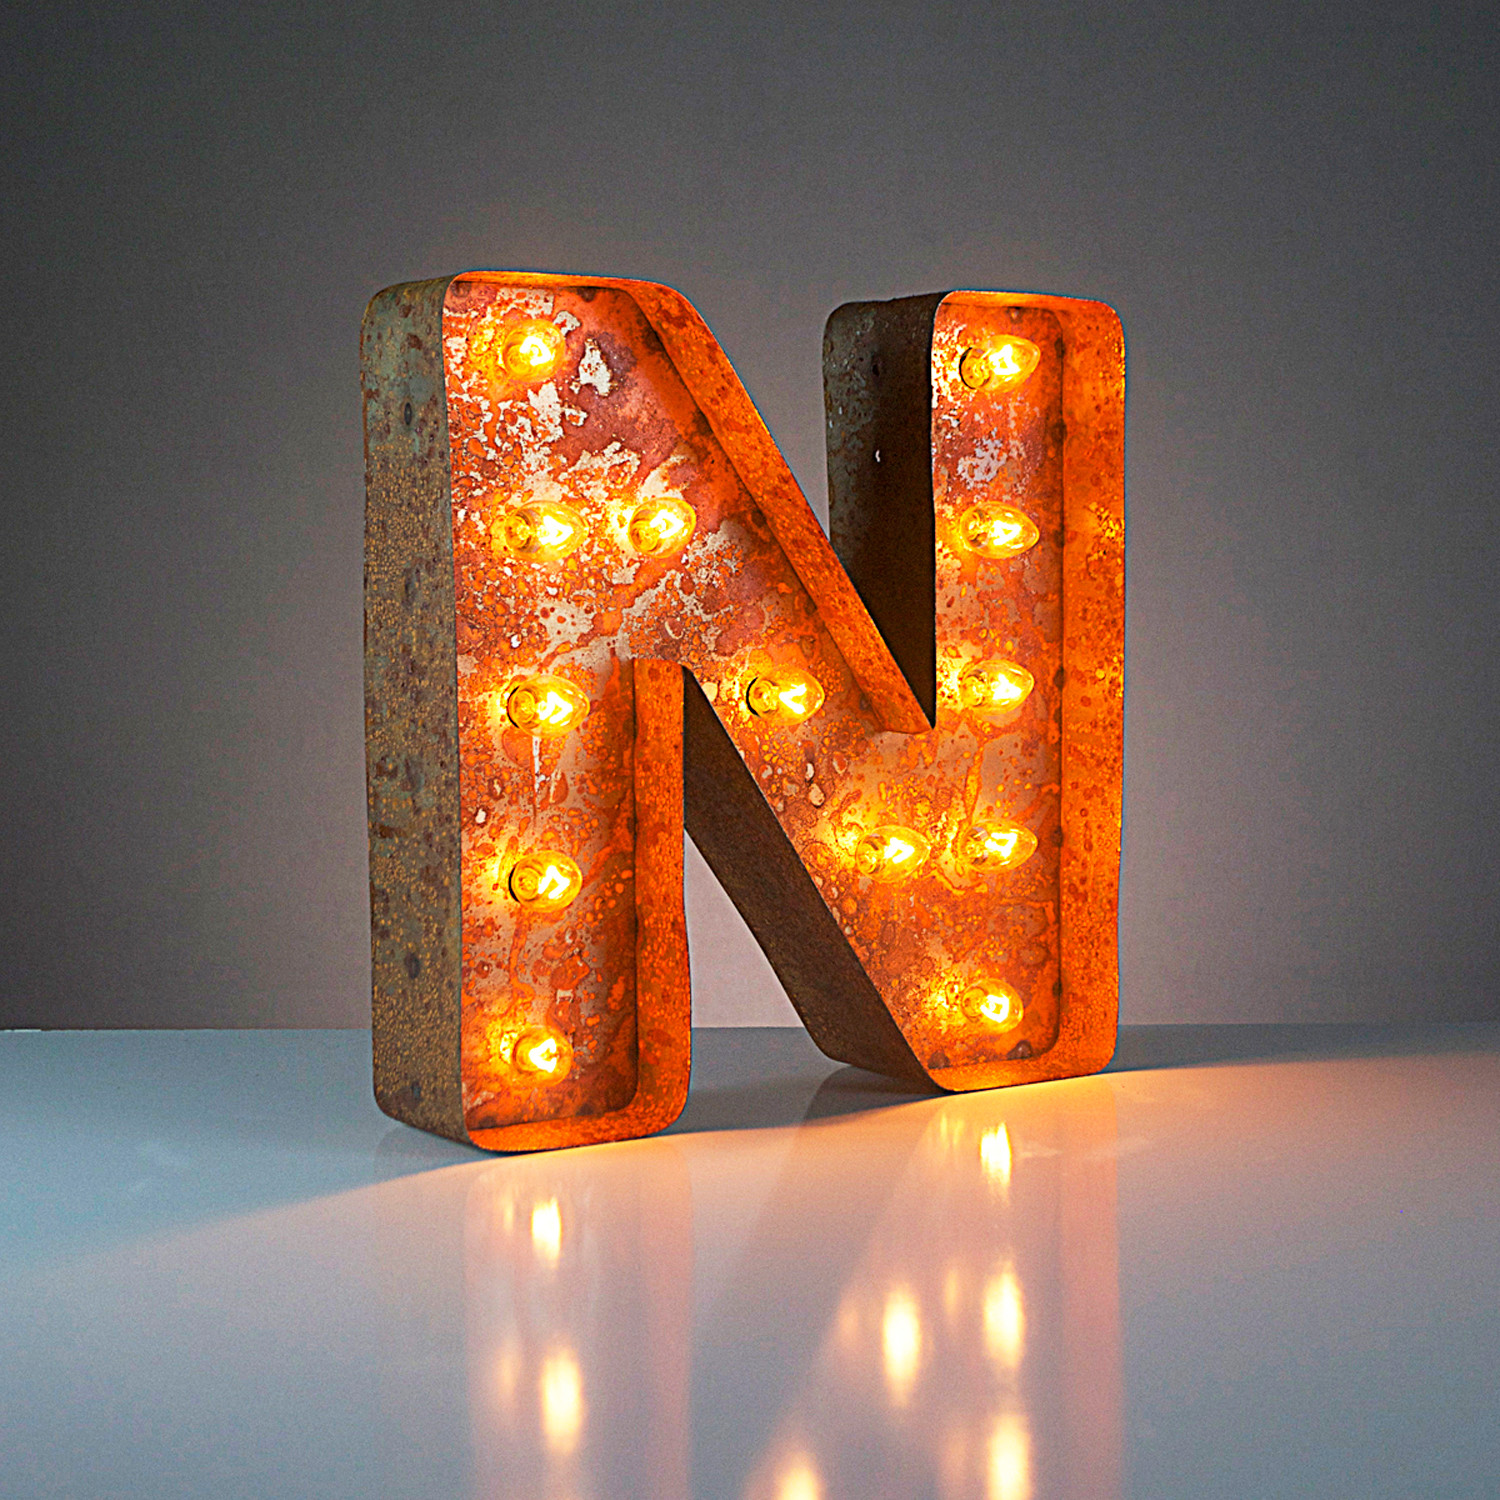  Vintage Marquee Lights New Decorating Ideas